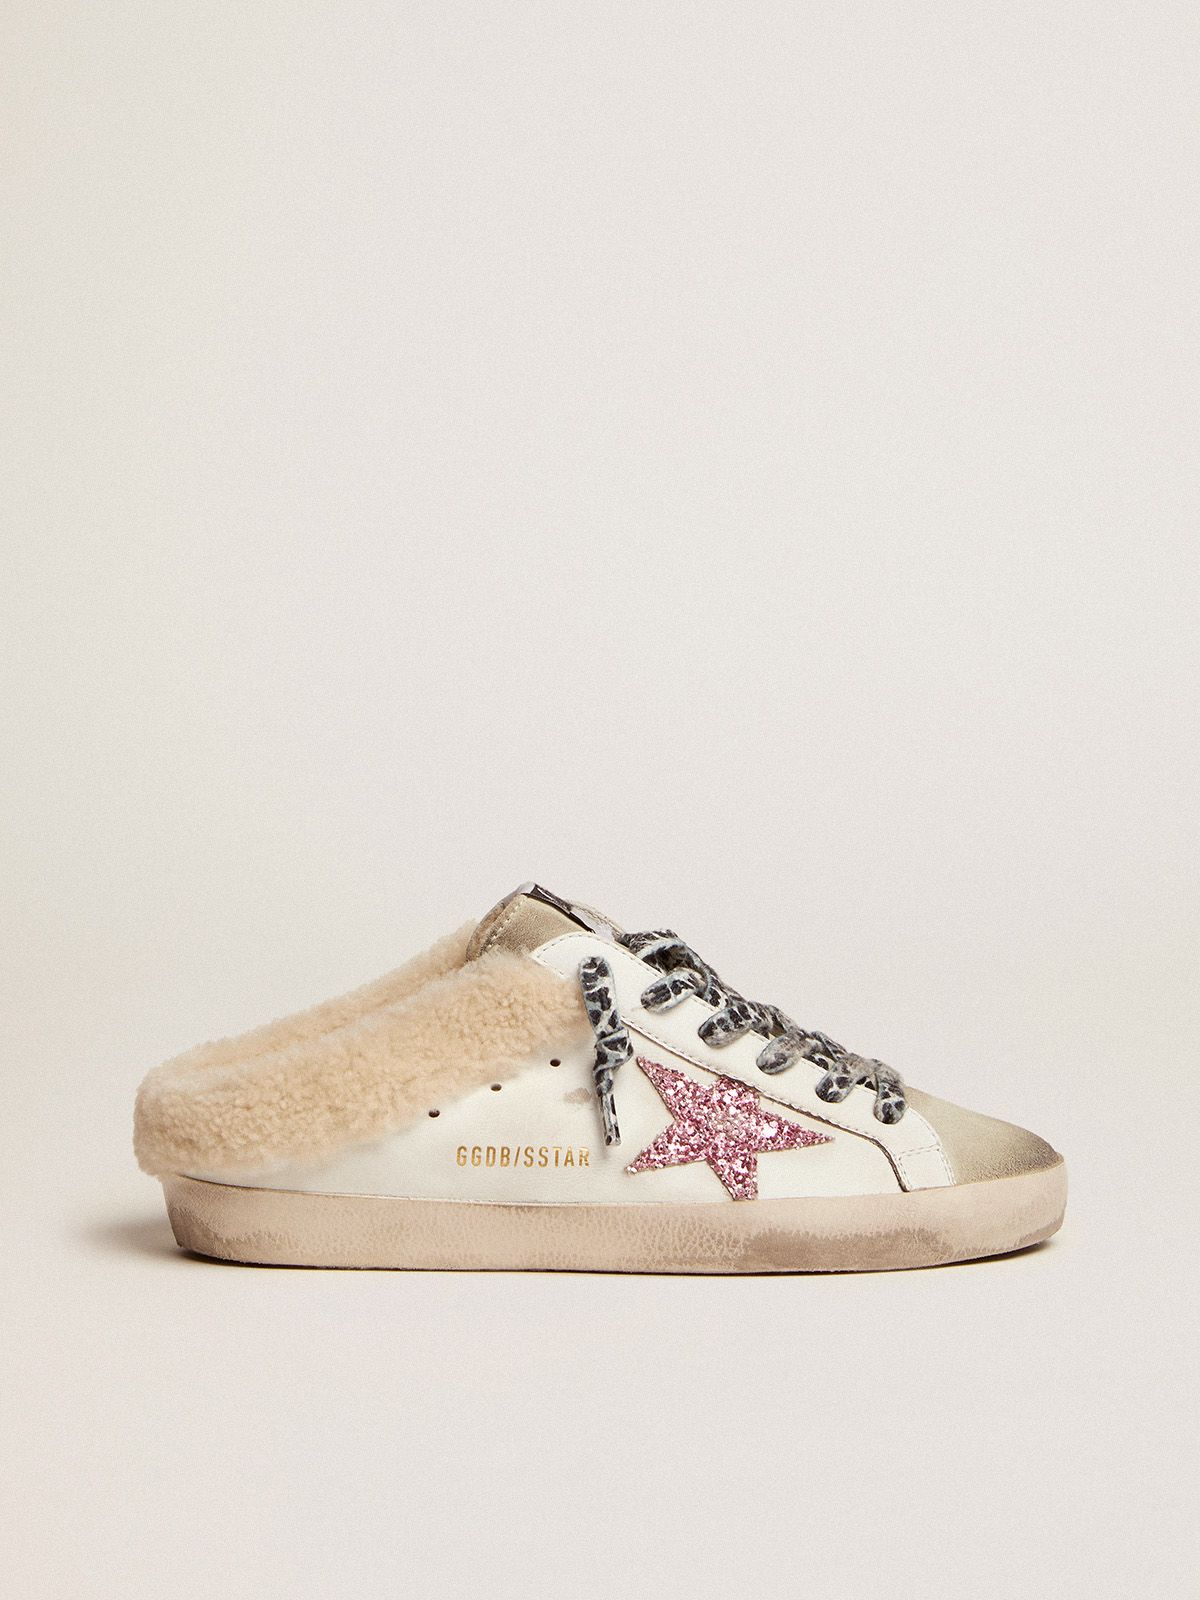 golden goose shearling glitter Sabots with pink and star lining Super-Star